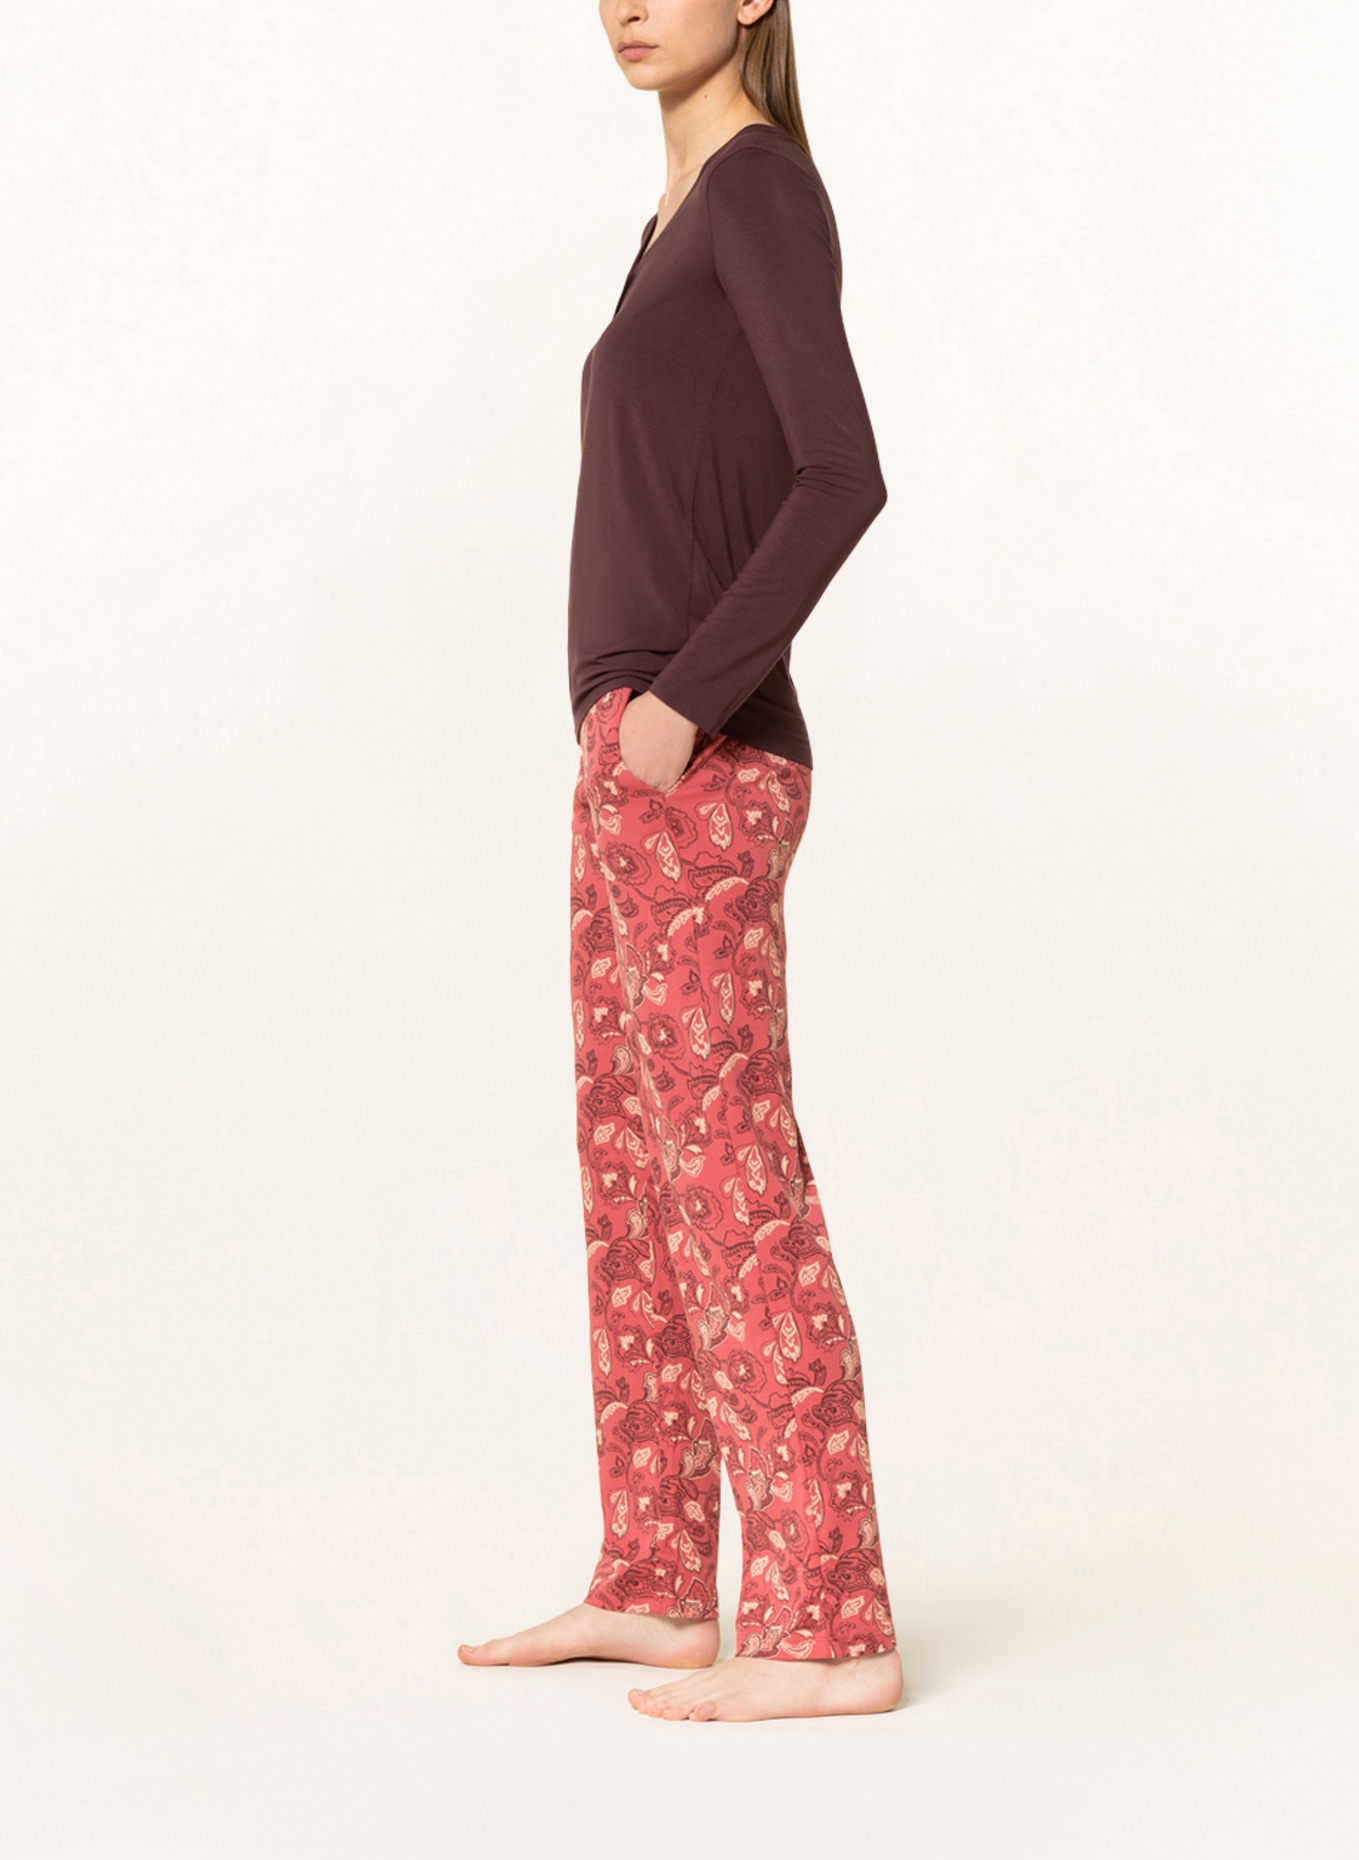 SCHIESSER Pajama pants MIX+RELAX, Color: LIGHT RED/ LIGHT YELLOW/ DARK BROWN (Image 4)